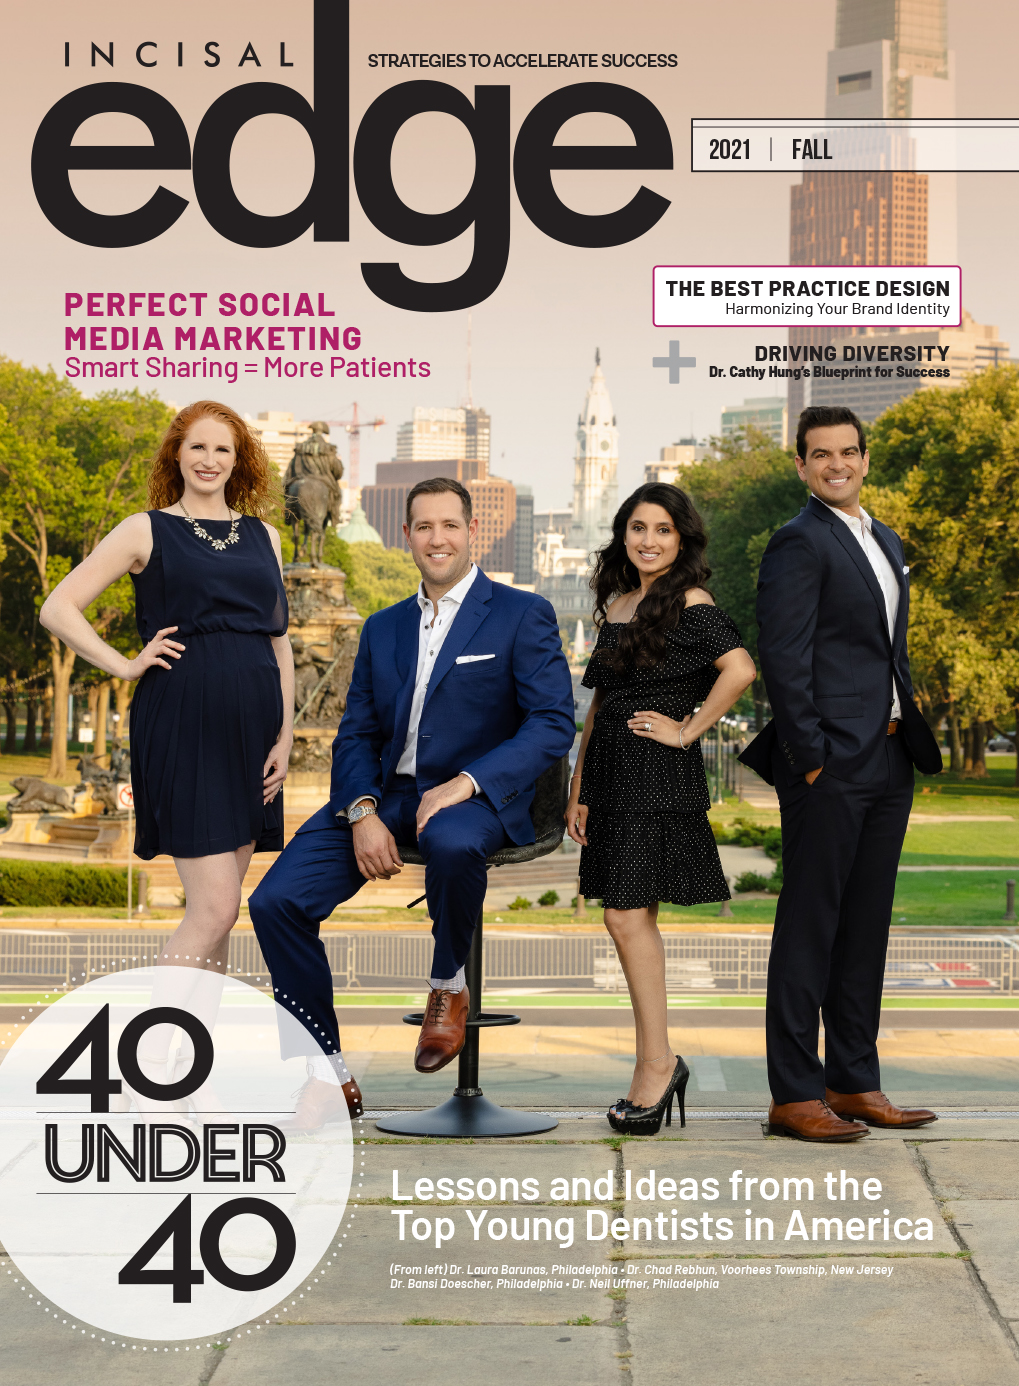 Fall Issue of Incisal Edge Profiles 2021 Recipients of the Dental Magazine’s Signature ‘40 Under 40’ Award for Young Dentists